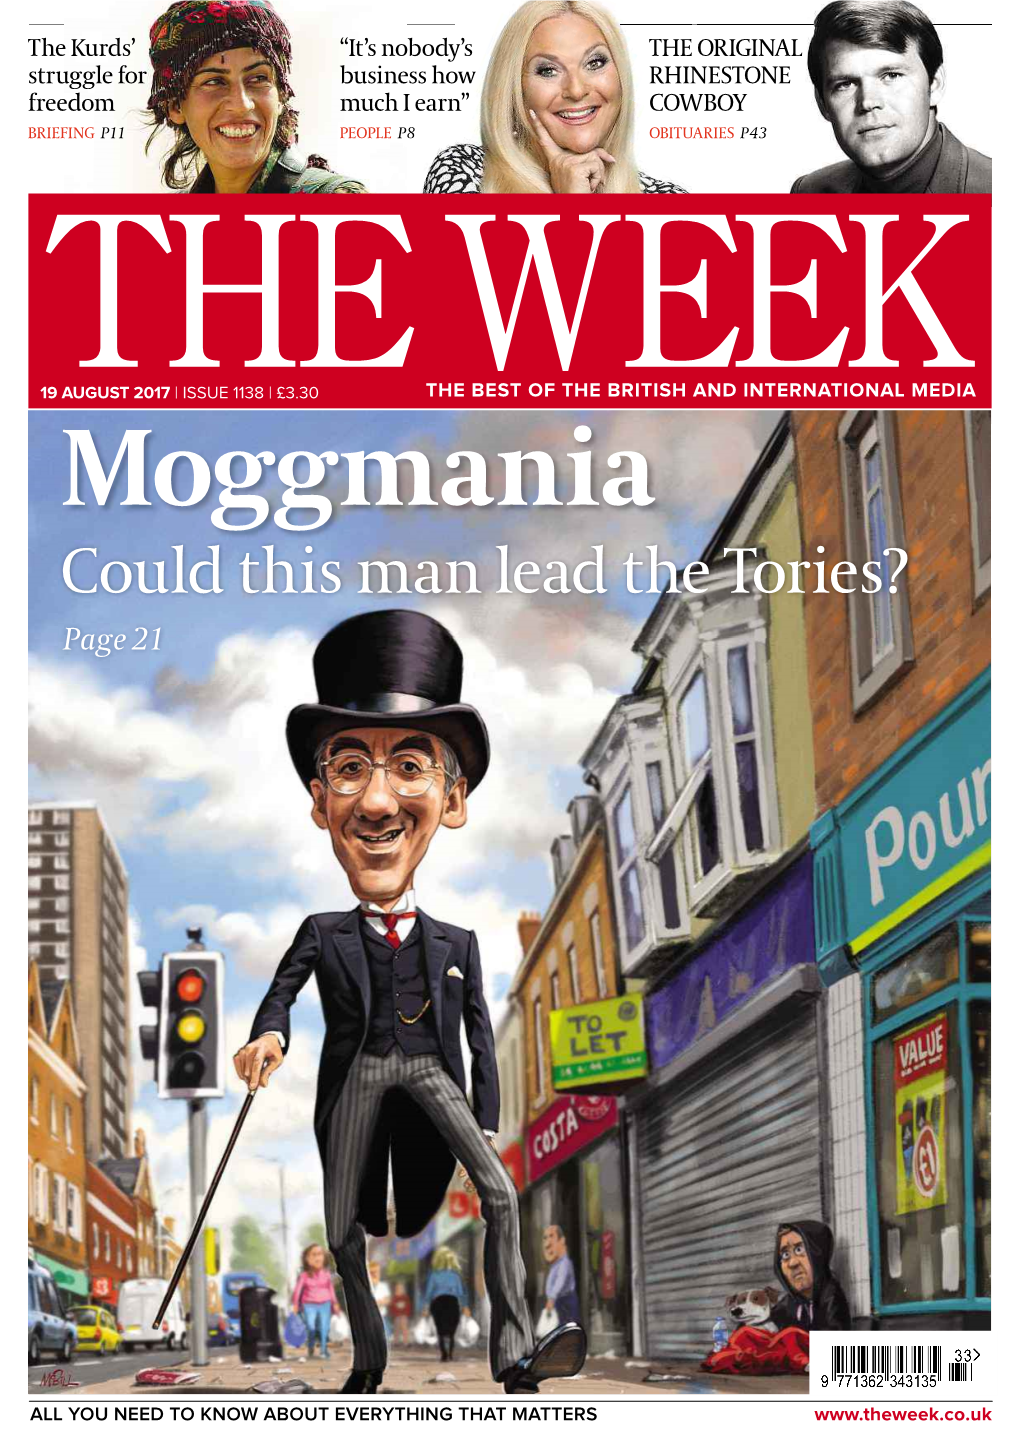 Moggmania Could This Man Lead the Tories? Page 21